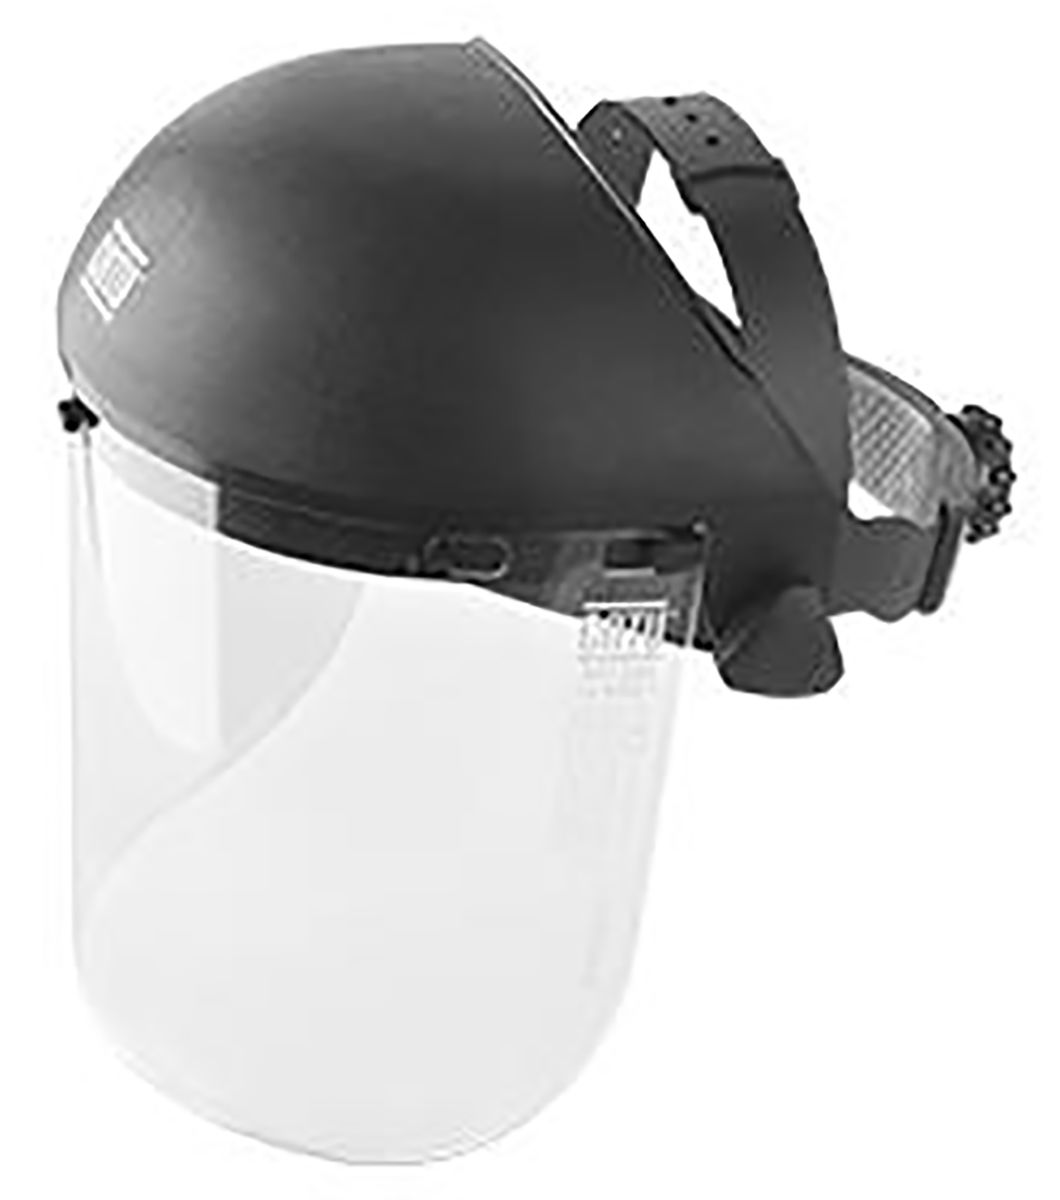 Catu Clear Flip Up PC Face Shield with Brow Guard , Resistant To Electric Arc, High Speed Particles, Impact